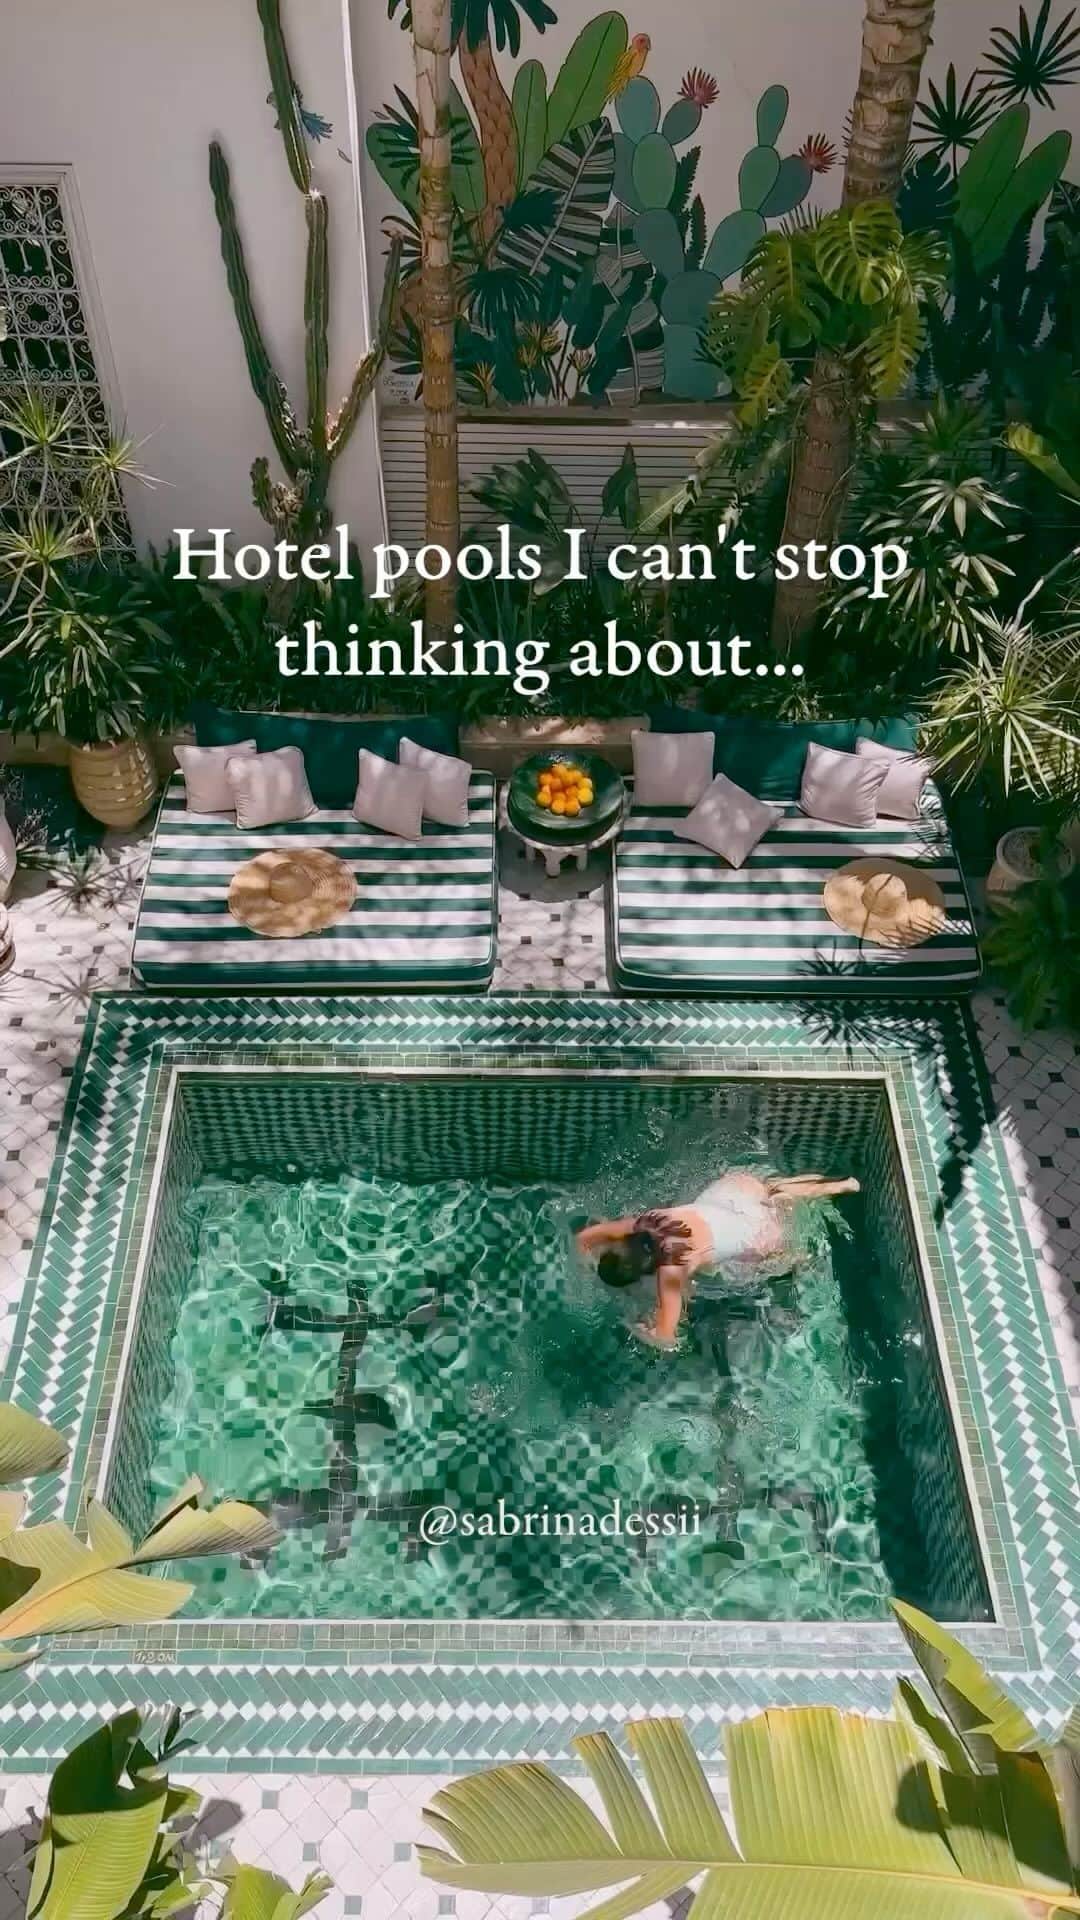 BEAUTIFUL HOTELSのインスタグラム：「Here are six hotel pools in Marrakech that are so good, you won’t be able to stop thinking about them. 🙌🏼💦✨  From tranquil Riad plunge pools to poolside tables at Nobu, Marrakech has so many inviting pool options that you’ll be left thinking about them for weeks. 😍💭  1. 📽 @sabrinadessii 📍 Le Riad Yasmine, Marrakech  2. 📽 @ananewyork 📍 Nobu, Marrakech  3. 📽 @villatajmarrakech 📍 Villa Taj Marrakech  4. 📽 @visit_morocco_ 📍 Riad BE Marrakech  5. 📽 @amine_ait_hak 📍 Kasbah Bab Ourika, Marrakech  6. 📽 @weloveourlife 📍 Royal Mansour, Marrakech」